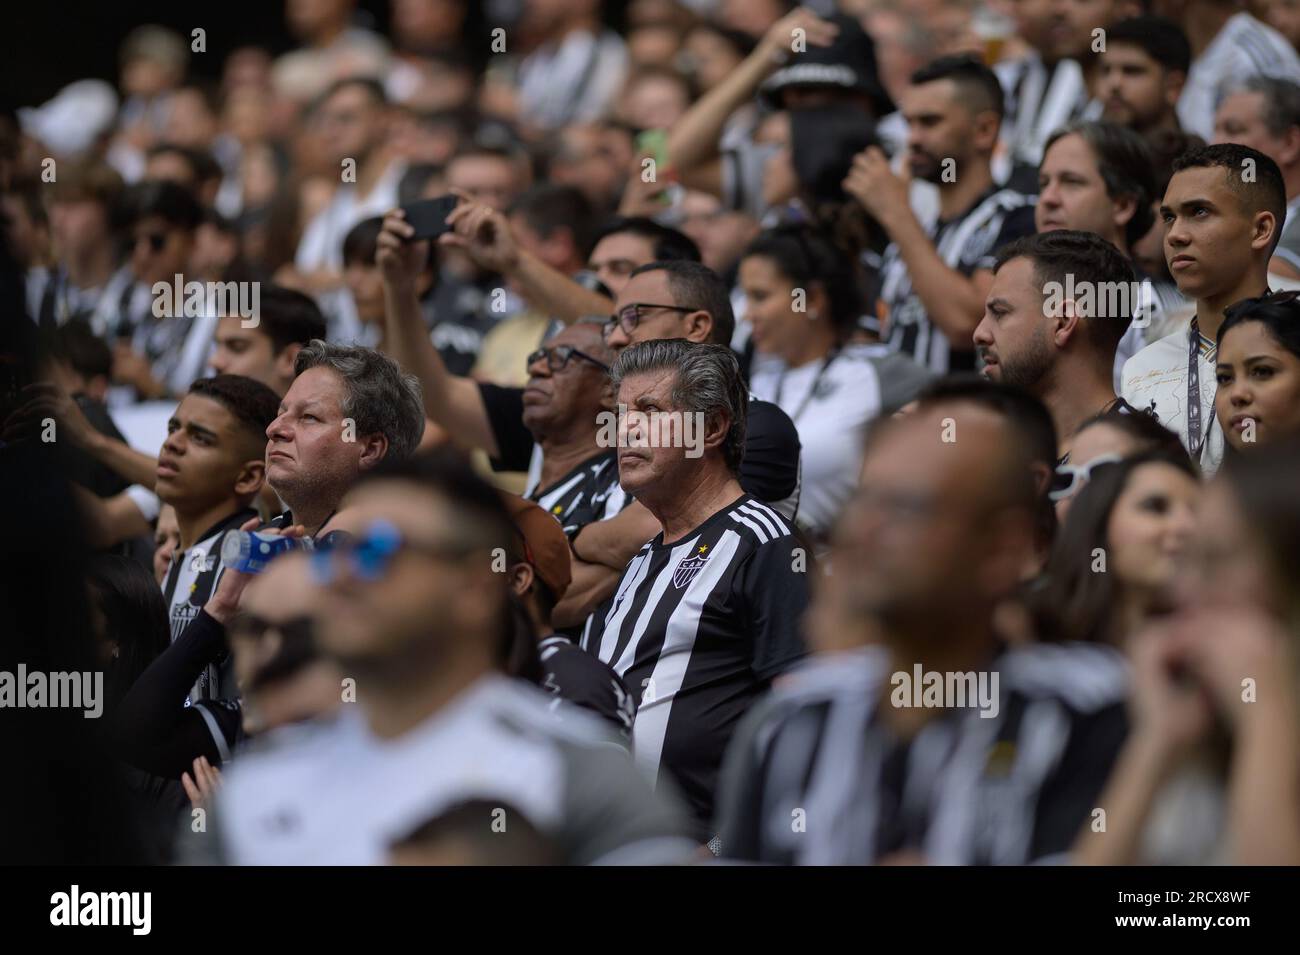 MG - BELO HORIZONTE - 07/16/2023 - FRIENDLY FRIENDLY, LENDAS DO GALO - Fans during the match between LENDAS DO GALO and [TEAM 2] at Arena MRV stadium for the Friendly championship. Photo: Alessandra Torres/AGIF/Sipa USA Stock Photo